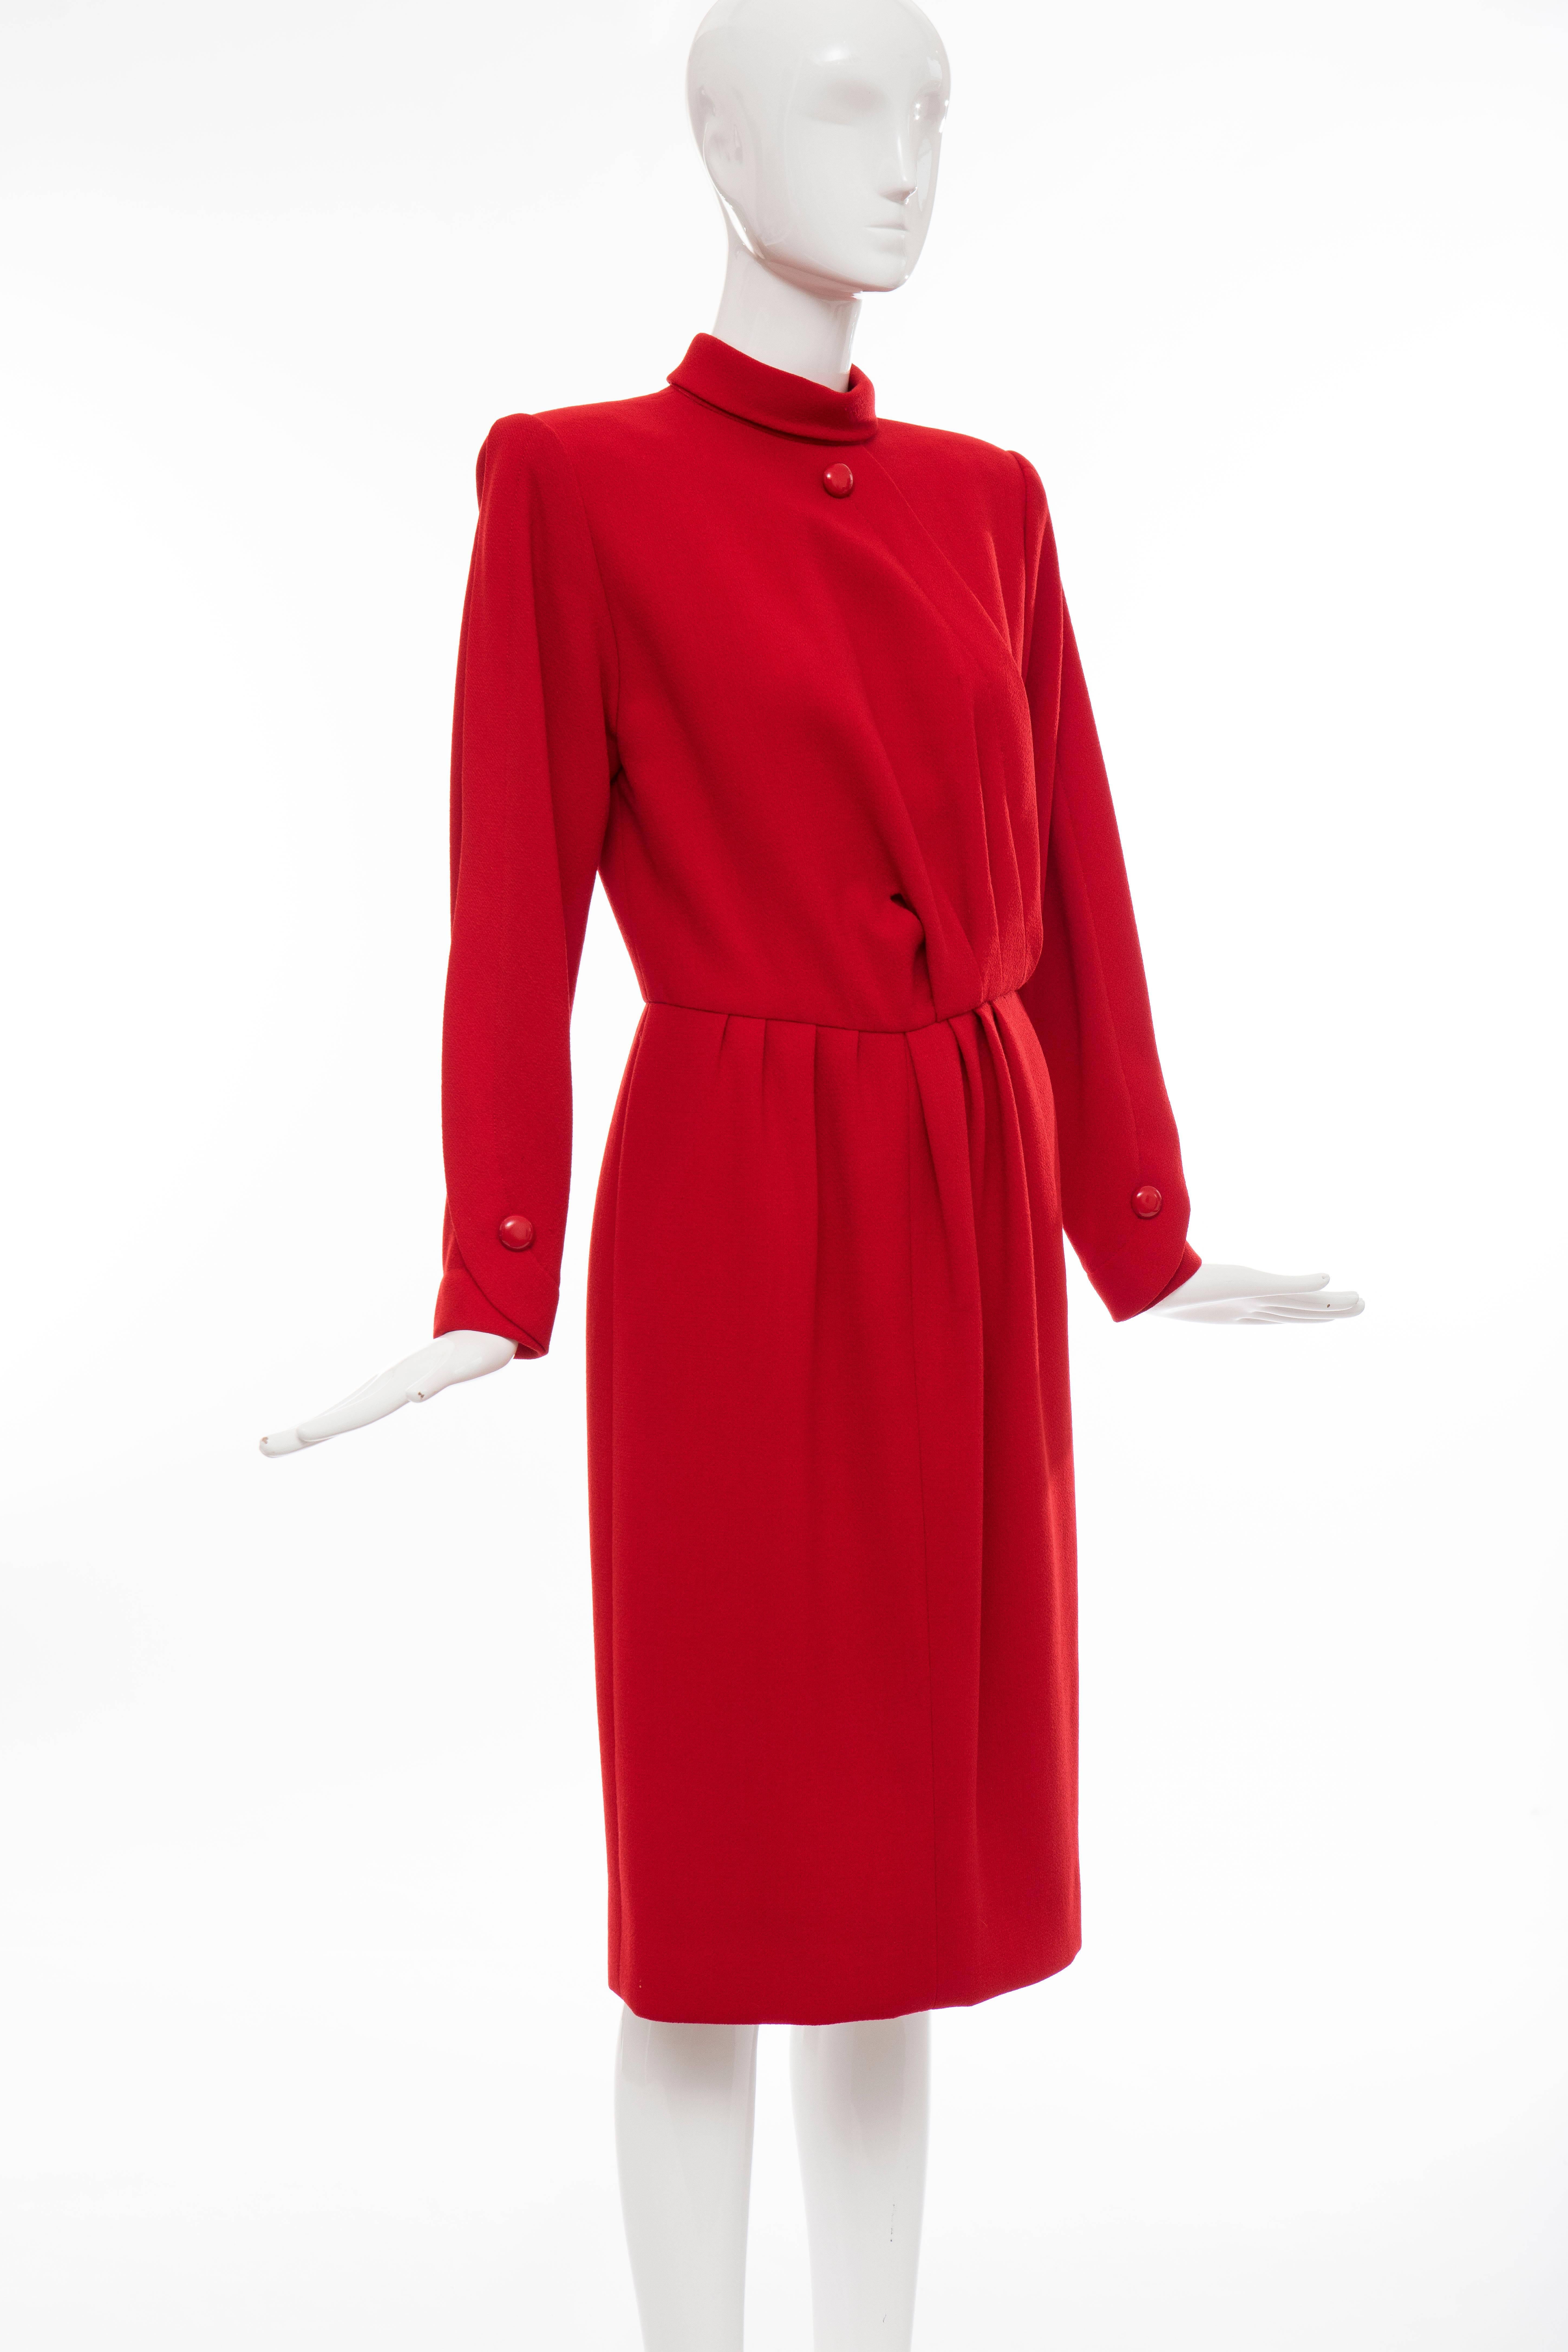 Nina Ricci Haute Couture Red Wool Crepe Dress, Circa 1980's In Excellent Condition For Sale In Cincinnati, OH